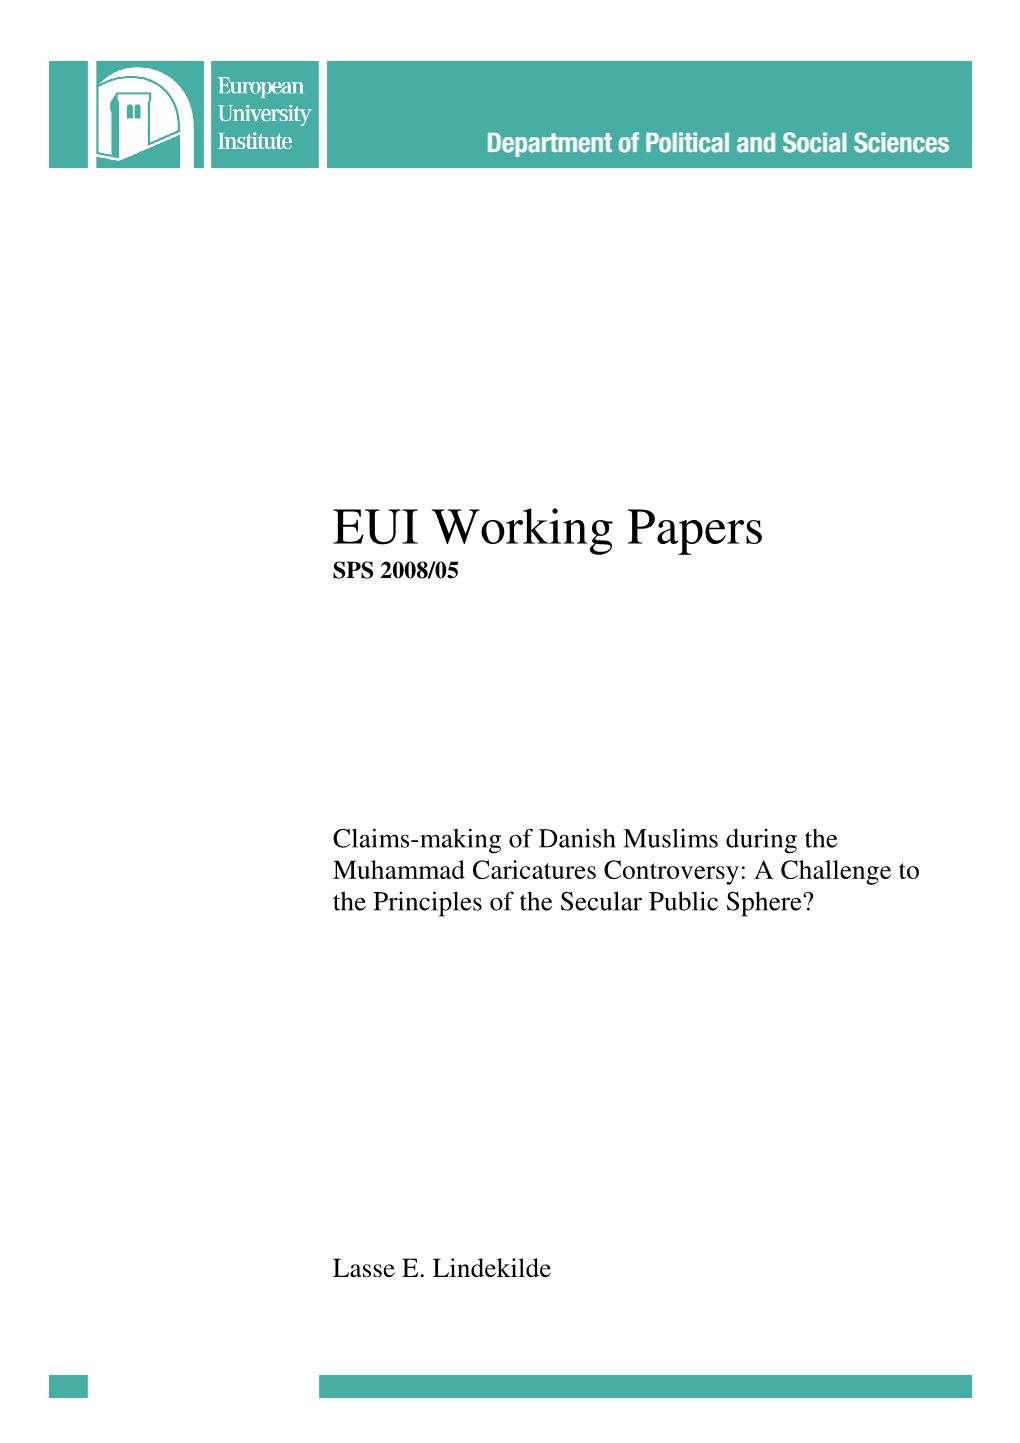 EUI Working Papers SPS 2008/05